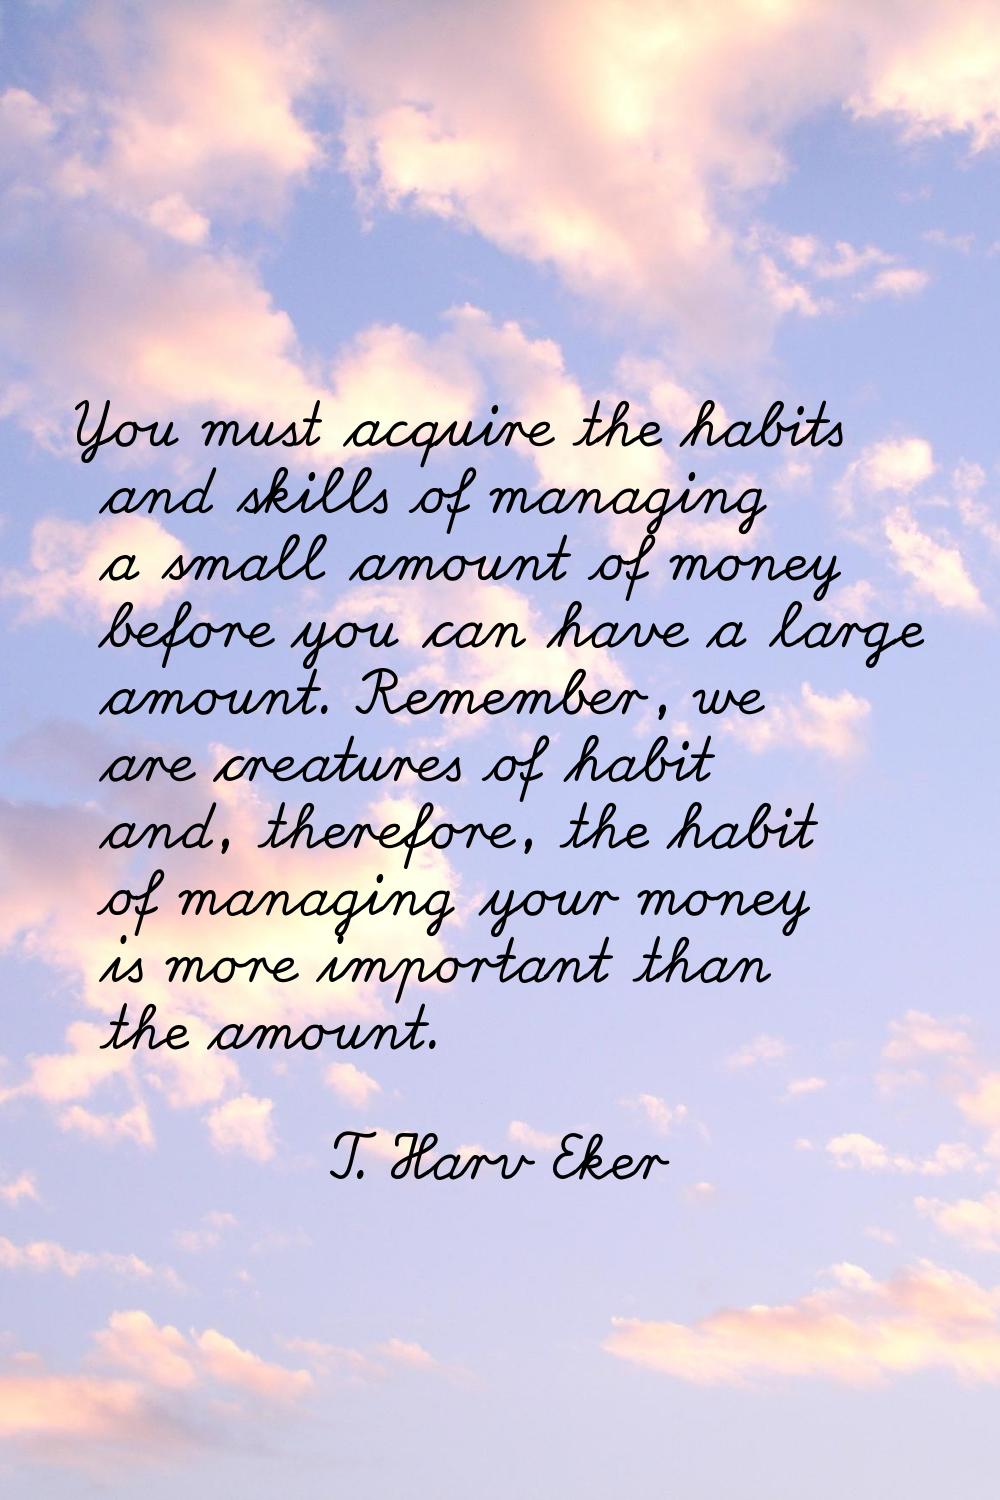 You must acquire the habits and skills of managing a small amount of money before you can have a la